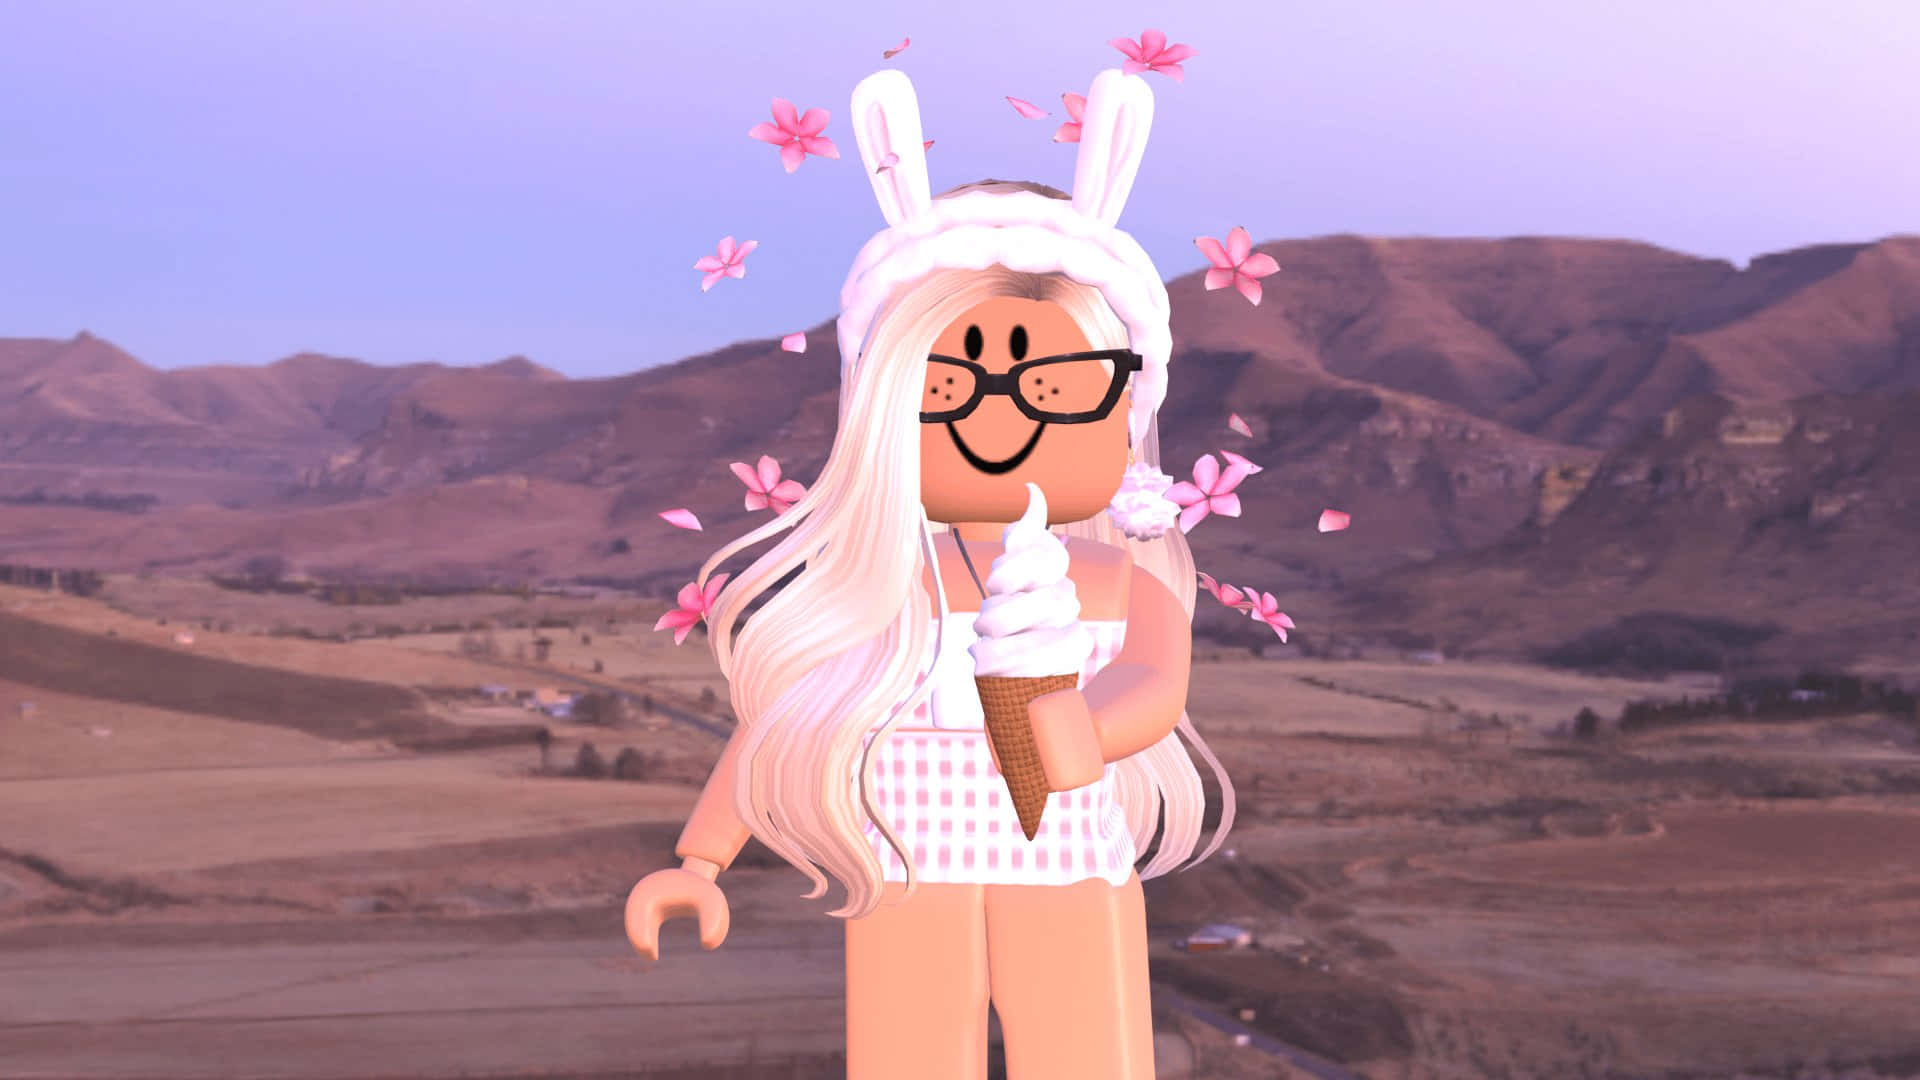 Download Customize your avatar with Aesthetic Roblox, the leading game of  all ages